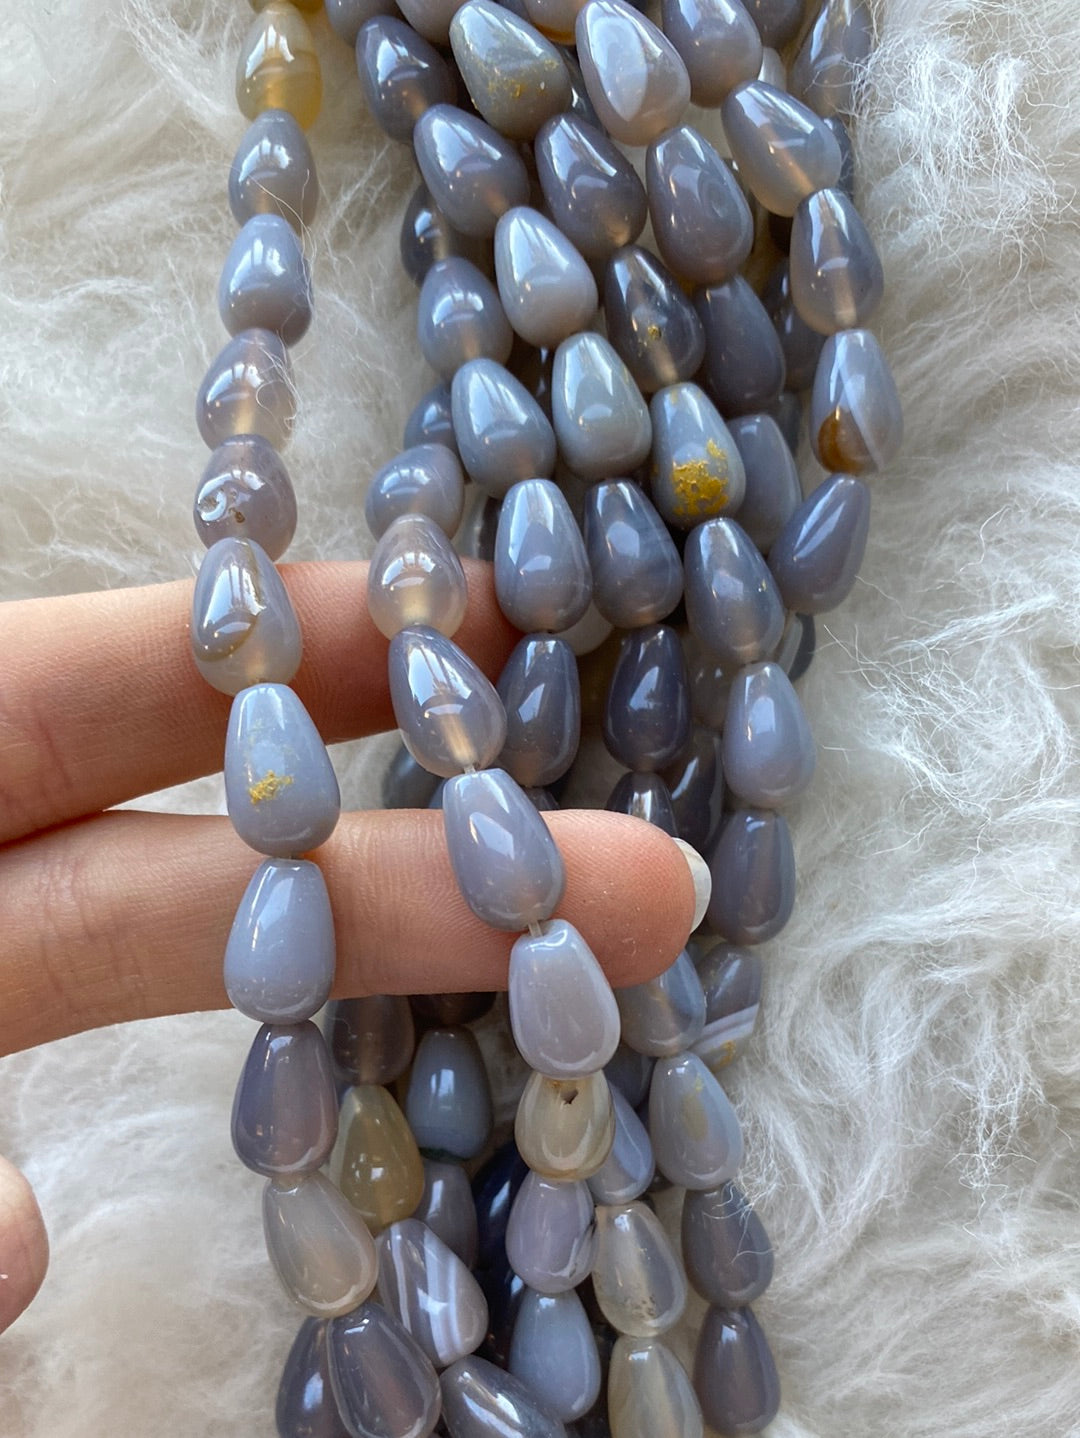 Crafting supplies such as agate teardrop beads available at wholesale and retail prices, only at our crystal shop in San Diego!